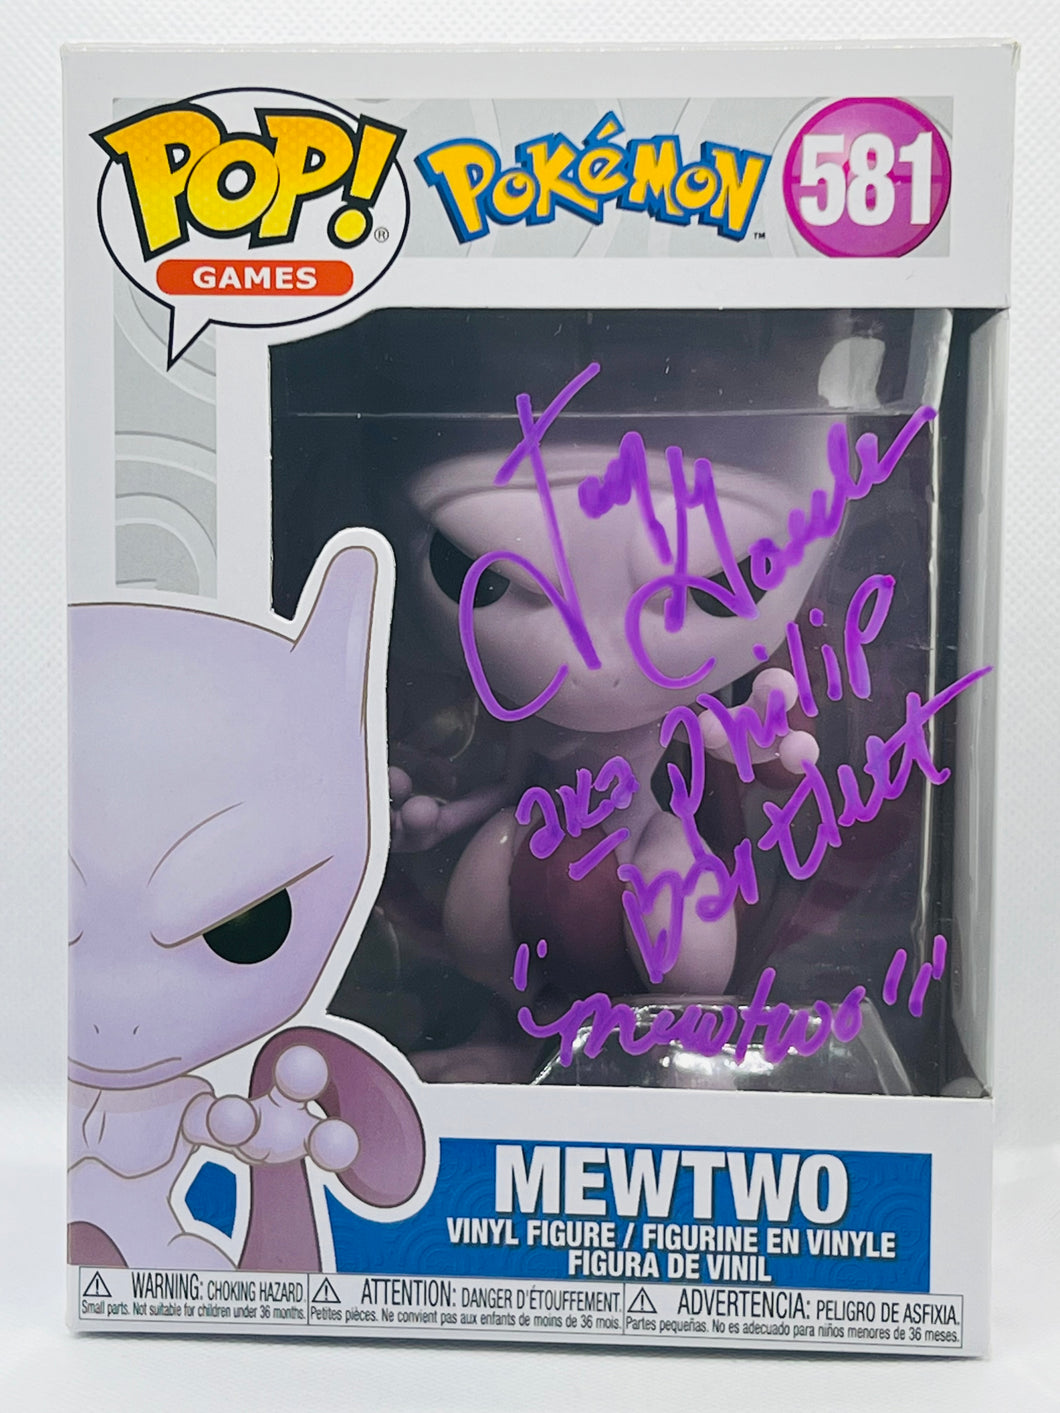 Mewtwo 581 Pokemon Funko Pop Signed by Jay Goede / aka Philip Bartlett in purple paint pen with character name